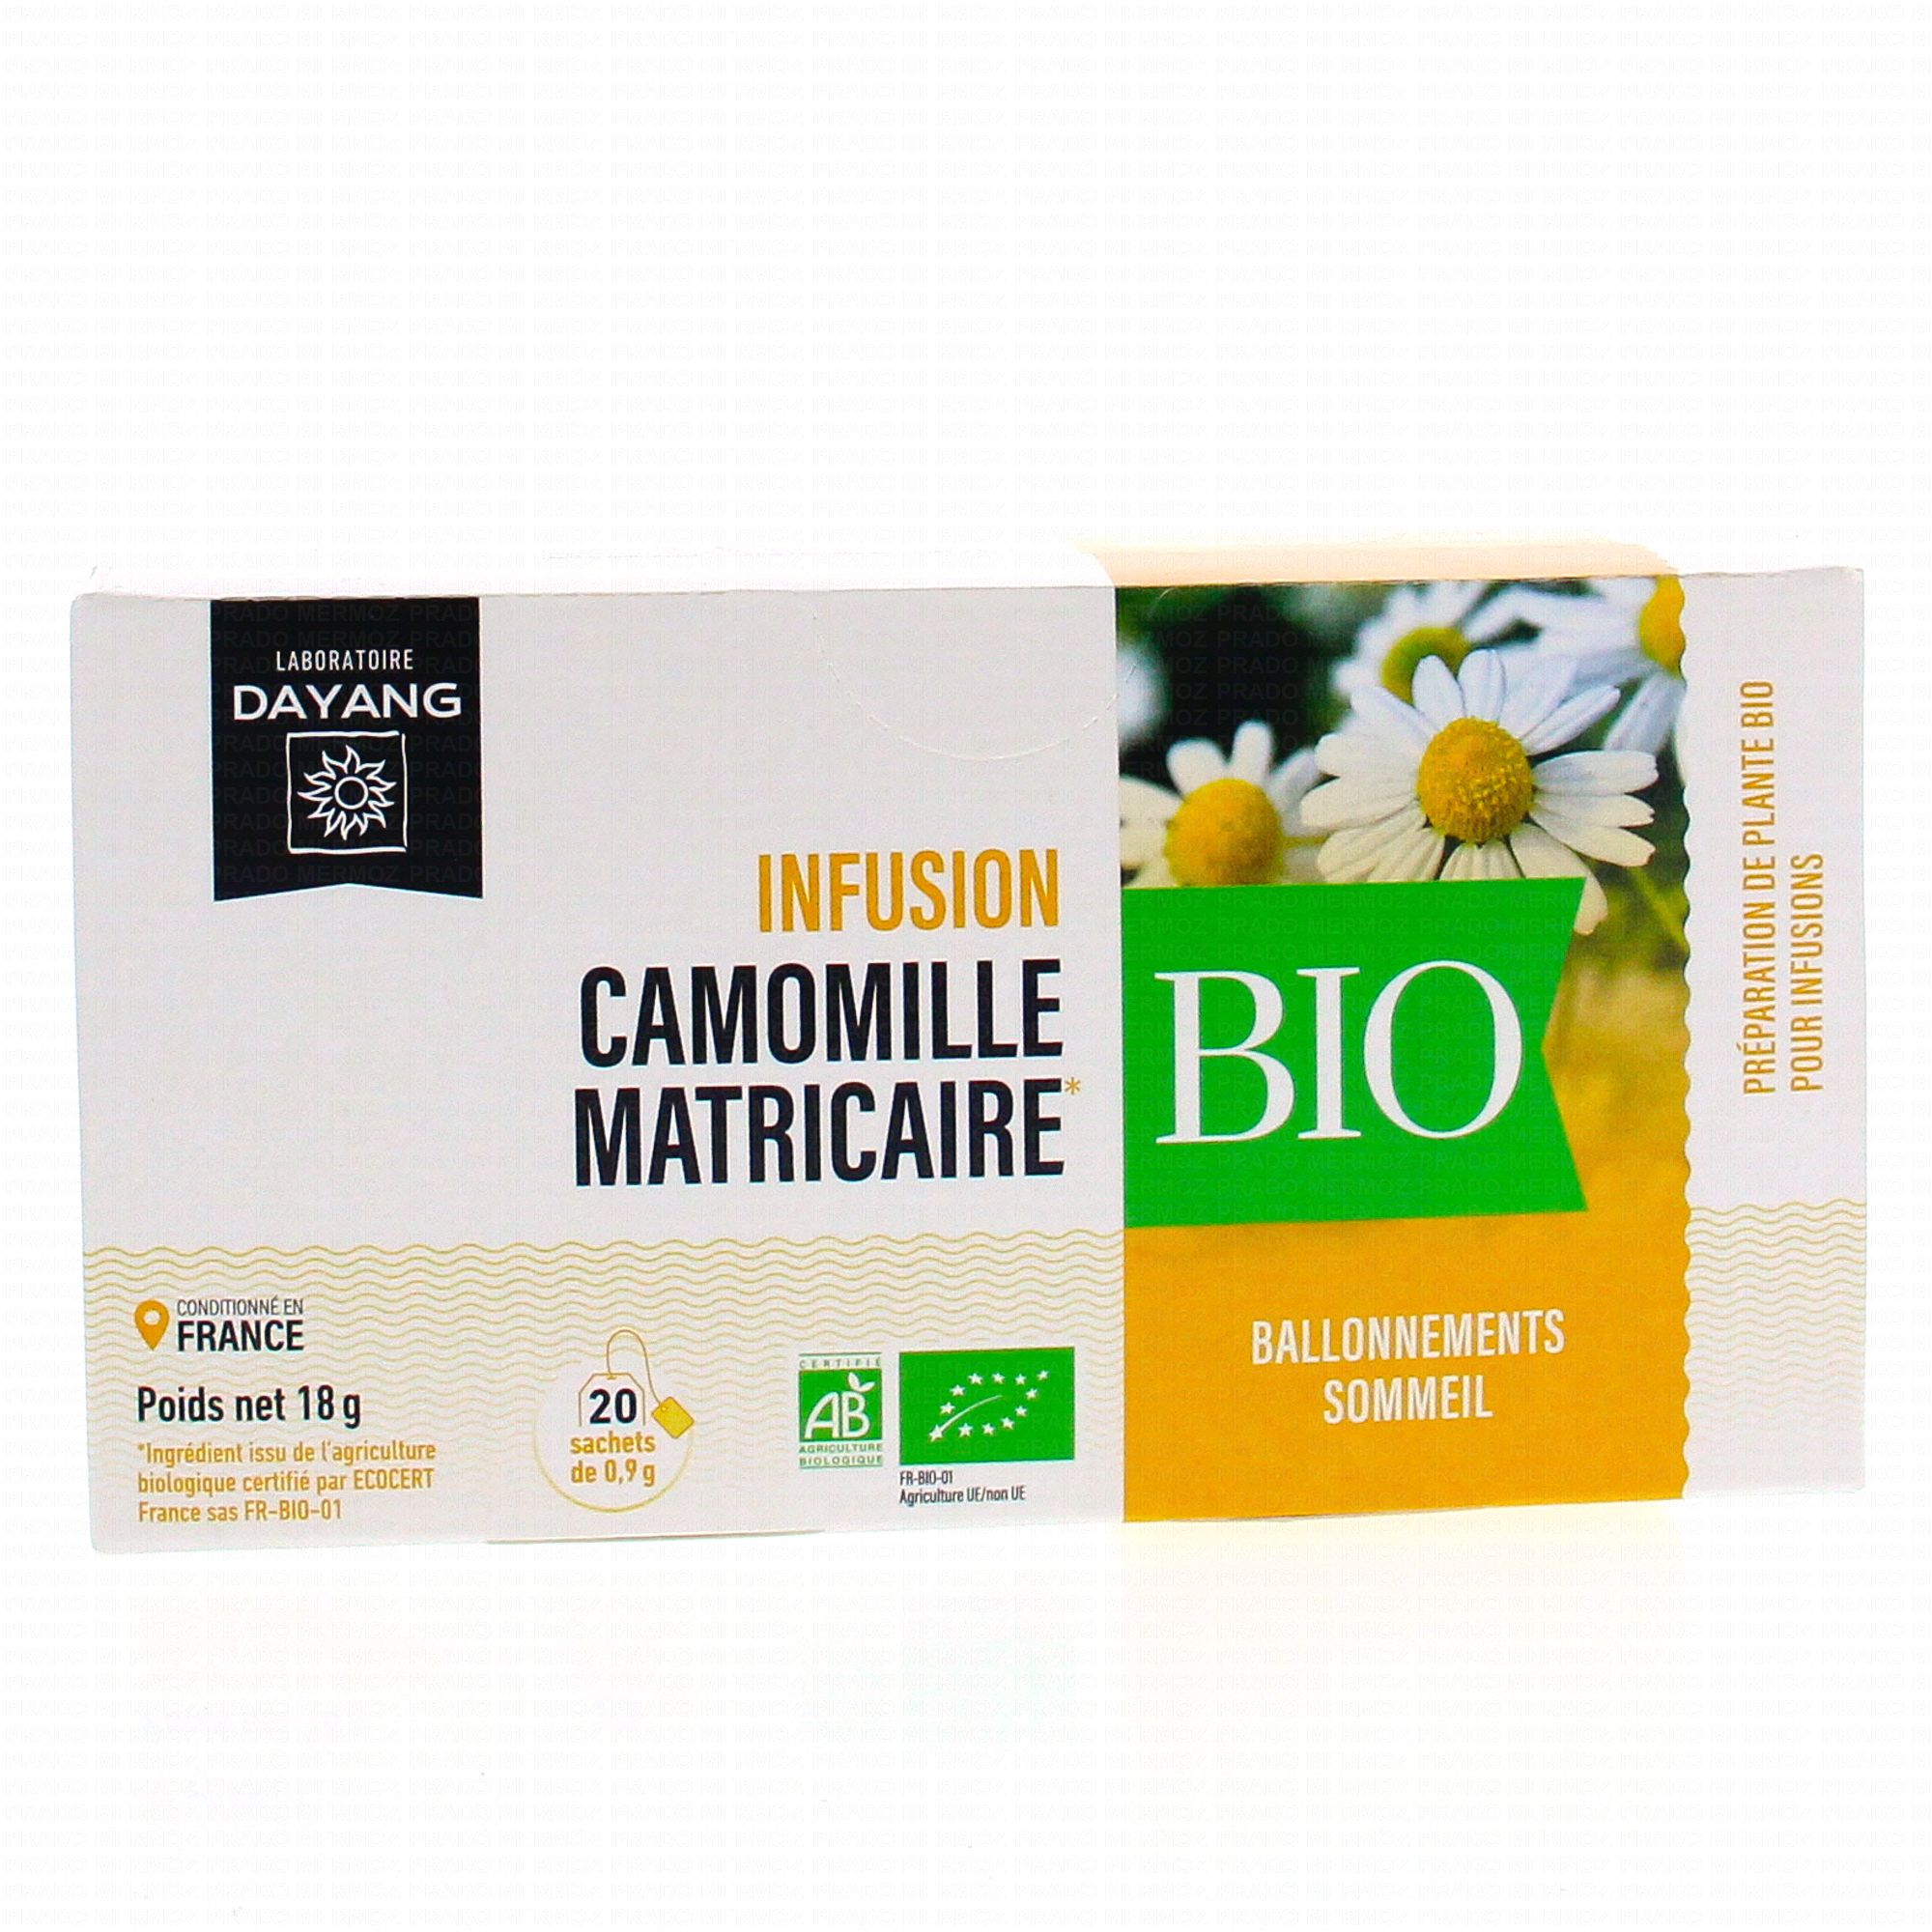 Infusion Camomille 18 Infusions Bio